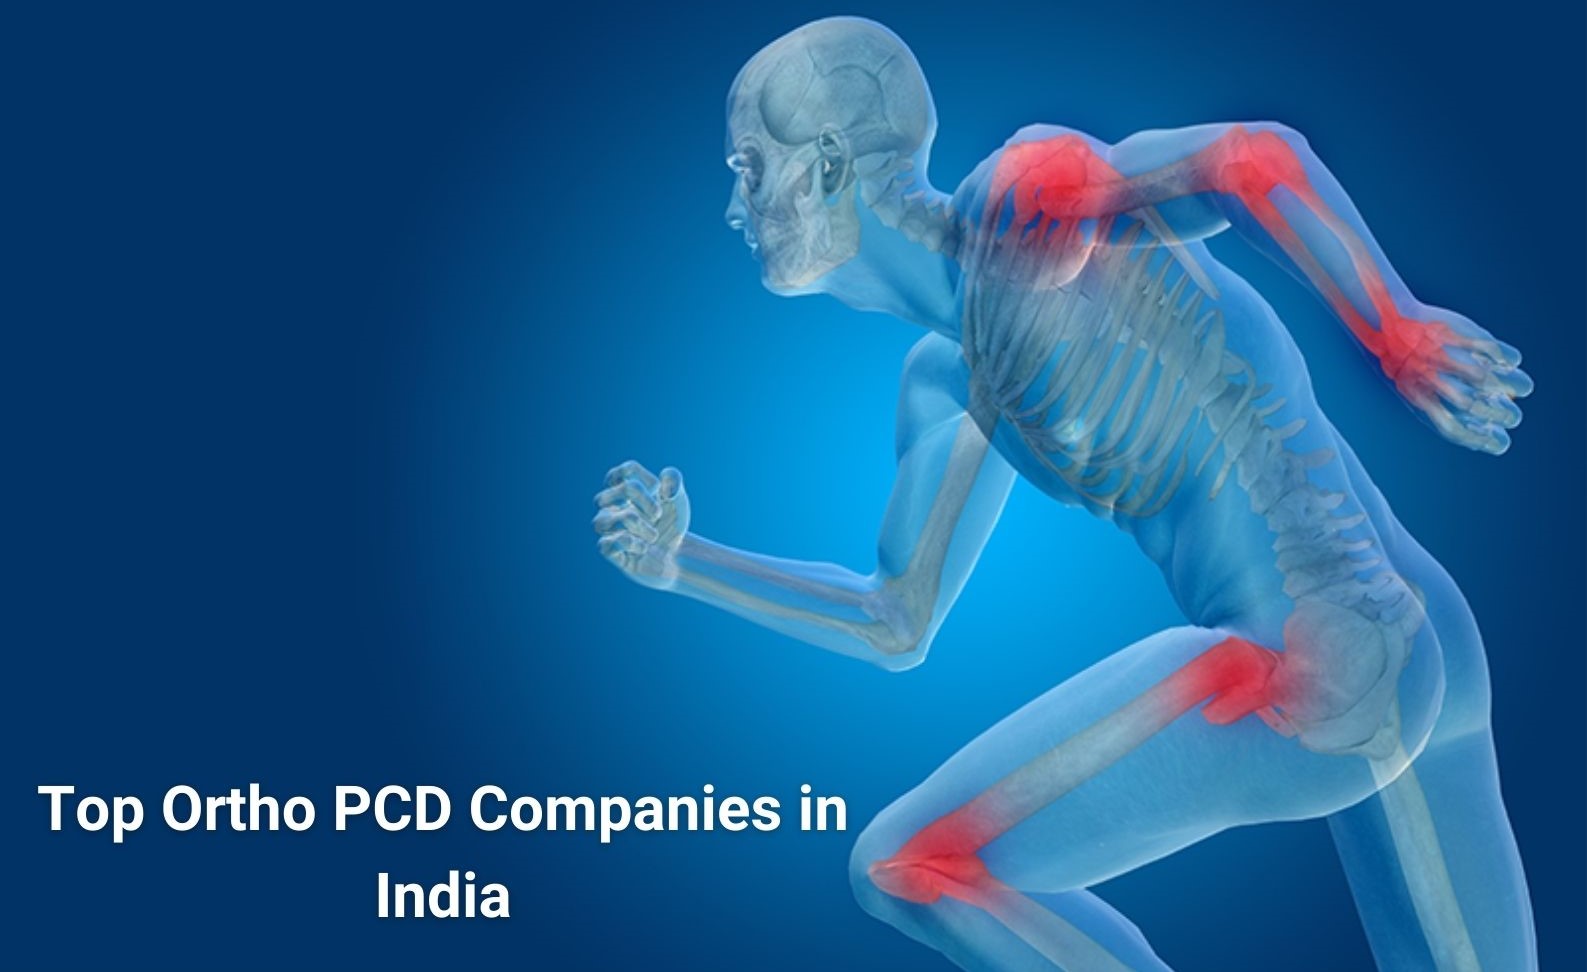 Top Ortho PCD Companies in India